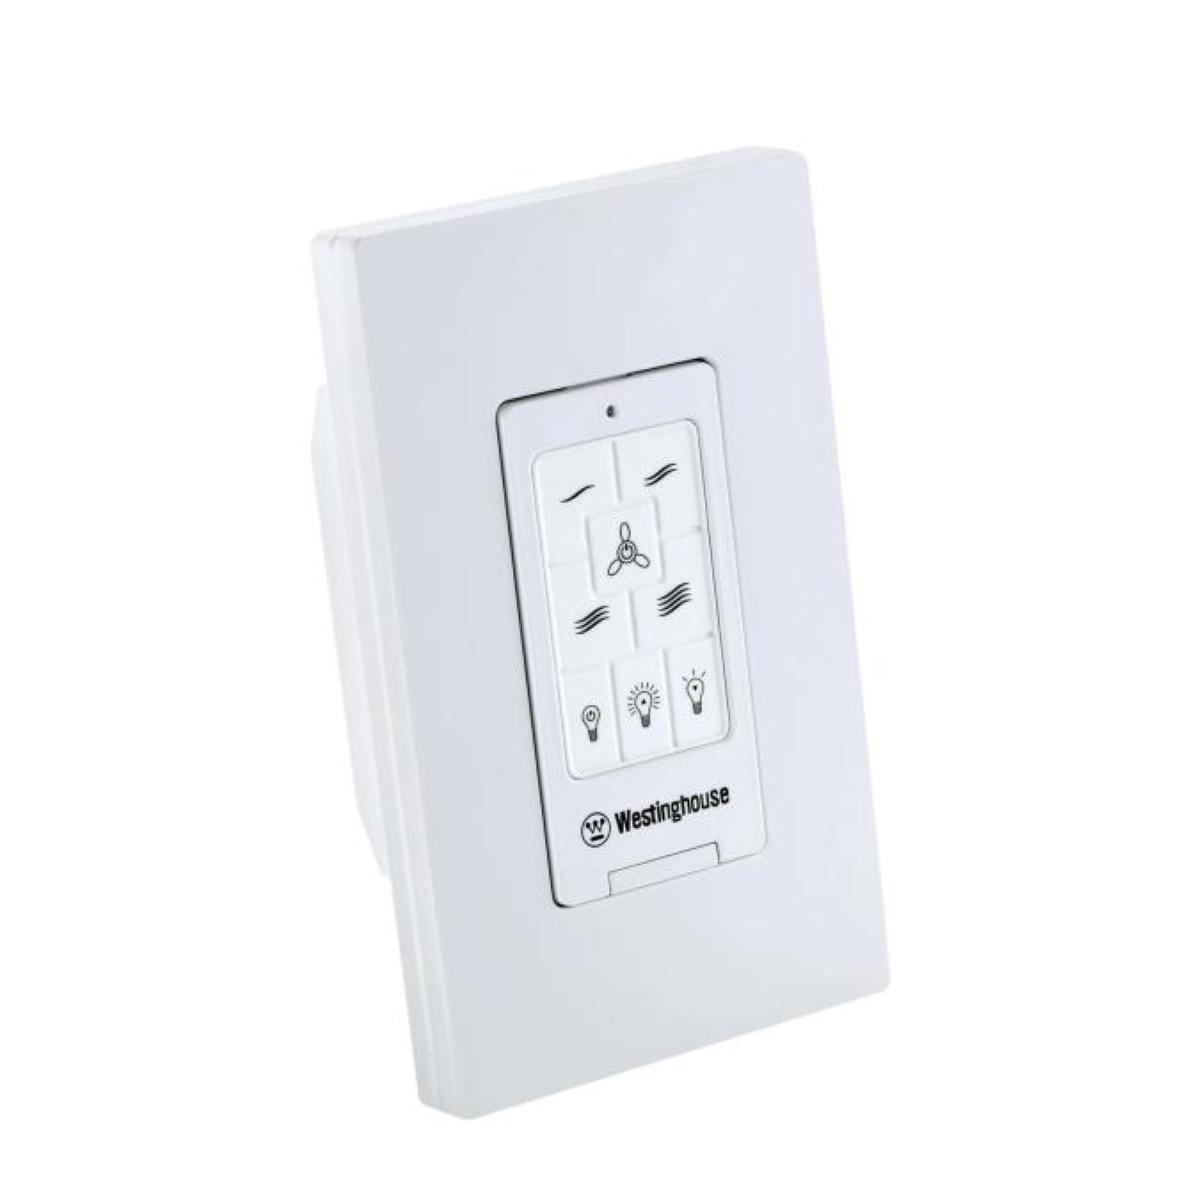 4 Speed Ceiling Fan and Light Wall Control, White Finish